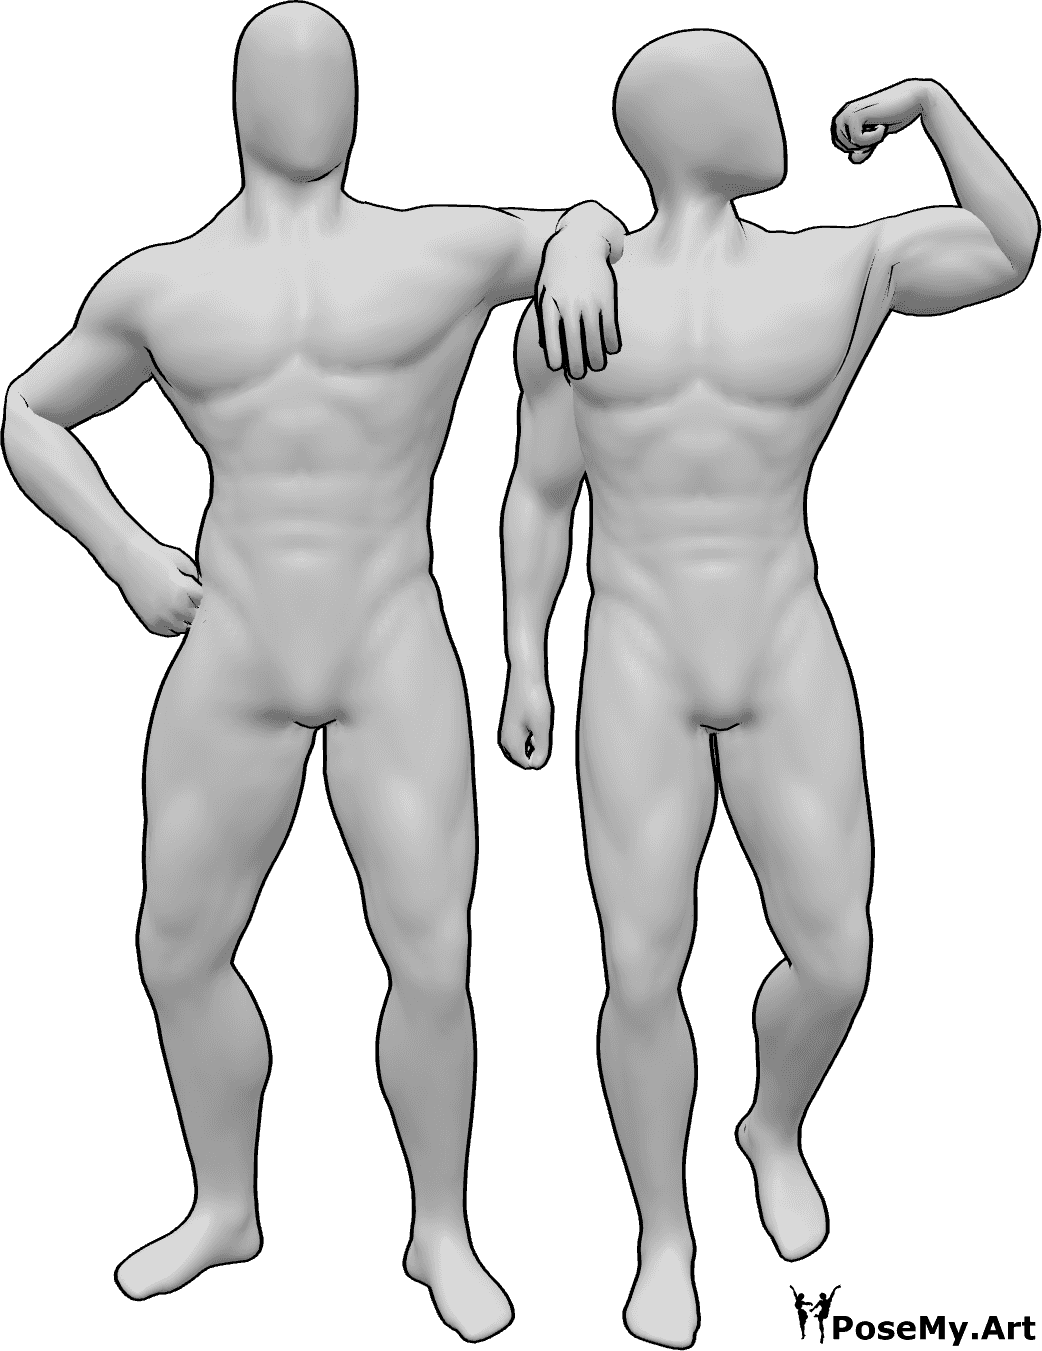 Pose Reference - Muscle males together pose - Two muscle males are standing and posing together, showing muscles